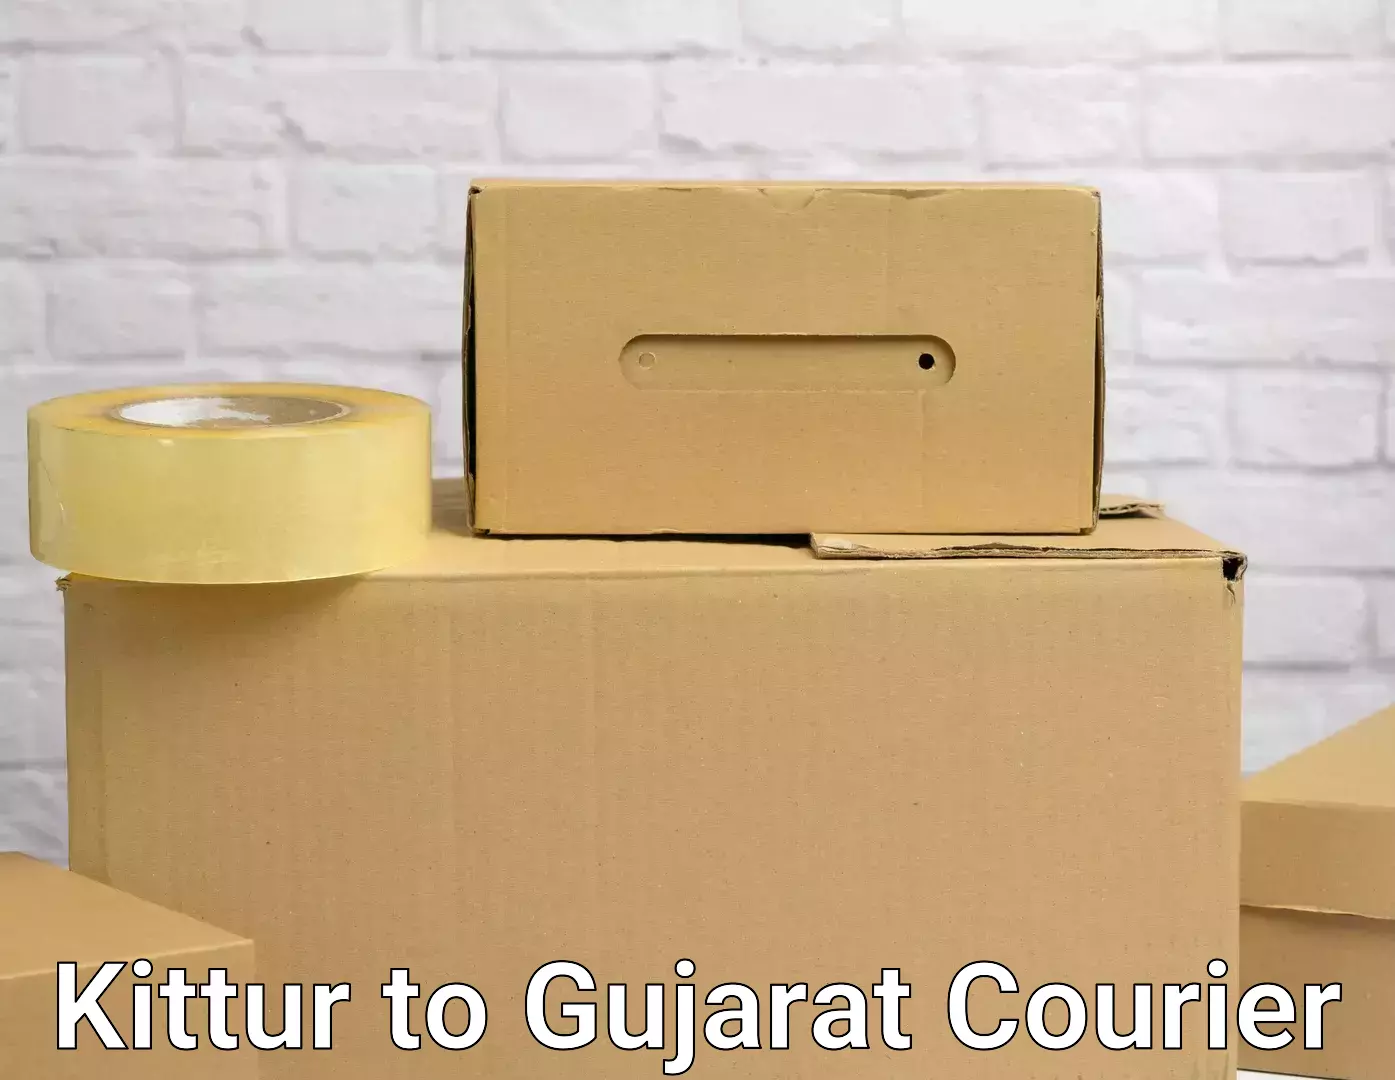 Nationwide moving services Kittur to Gujarat